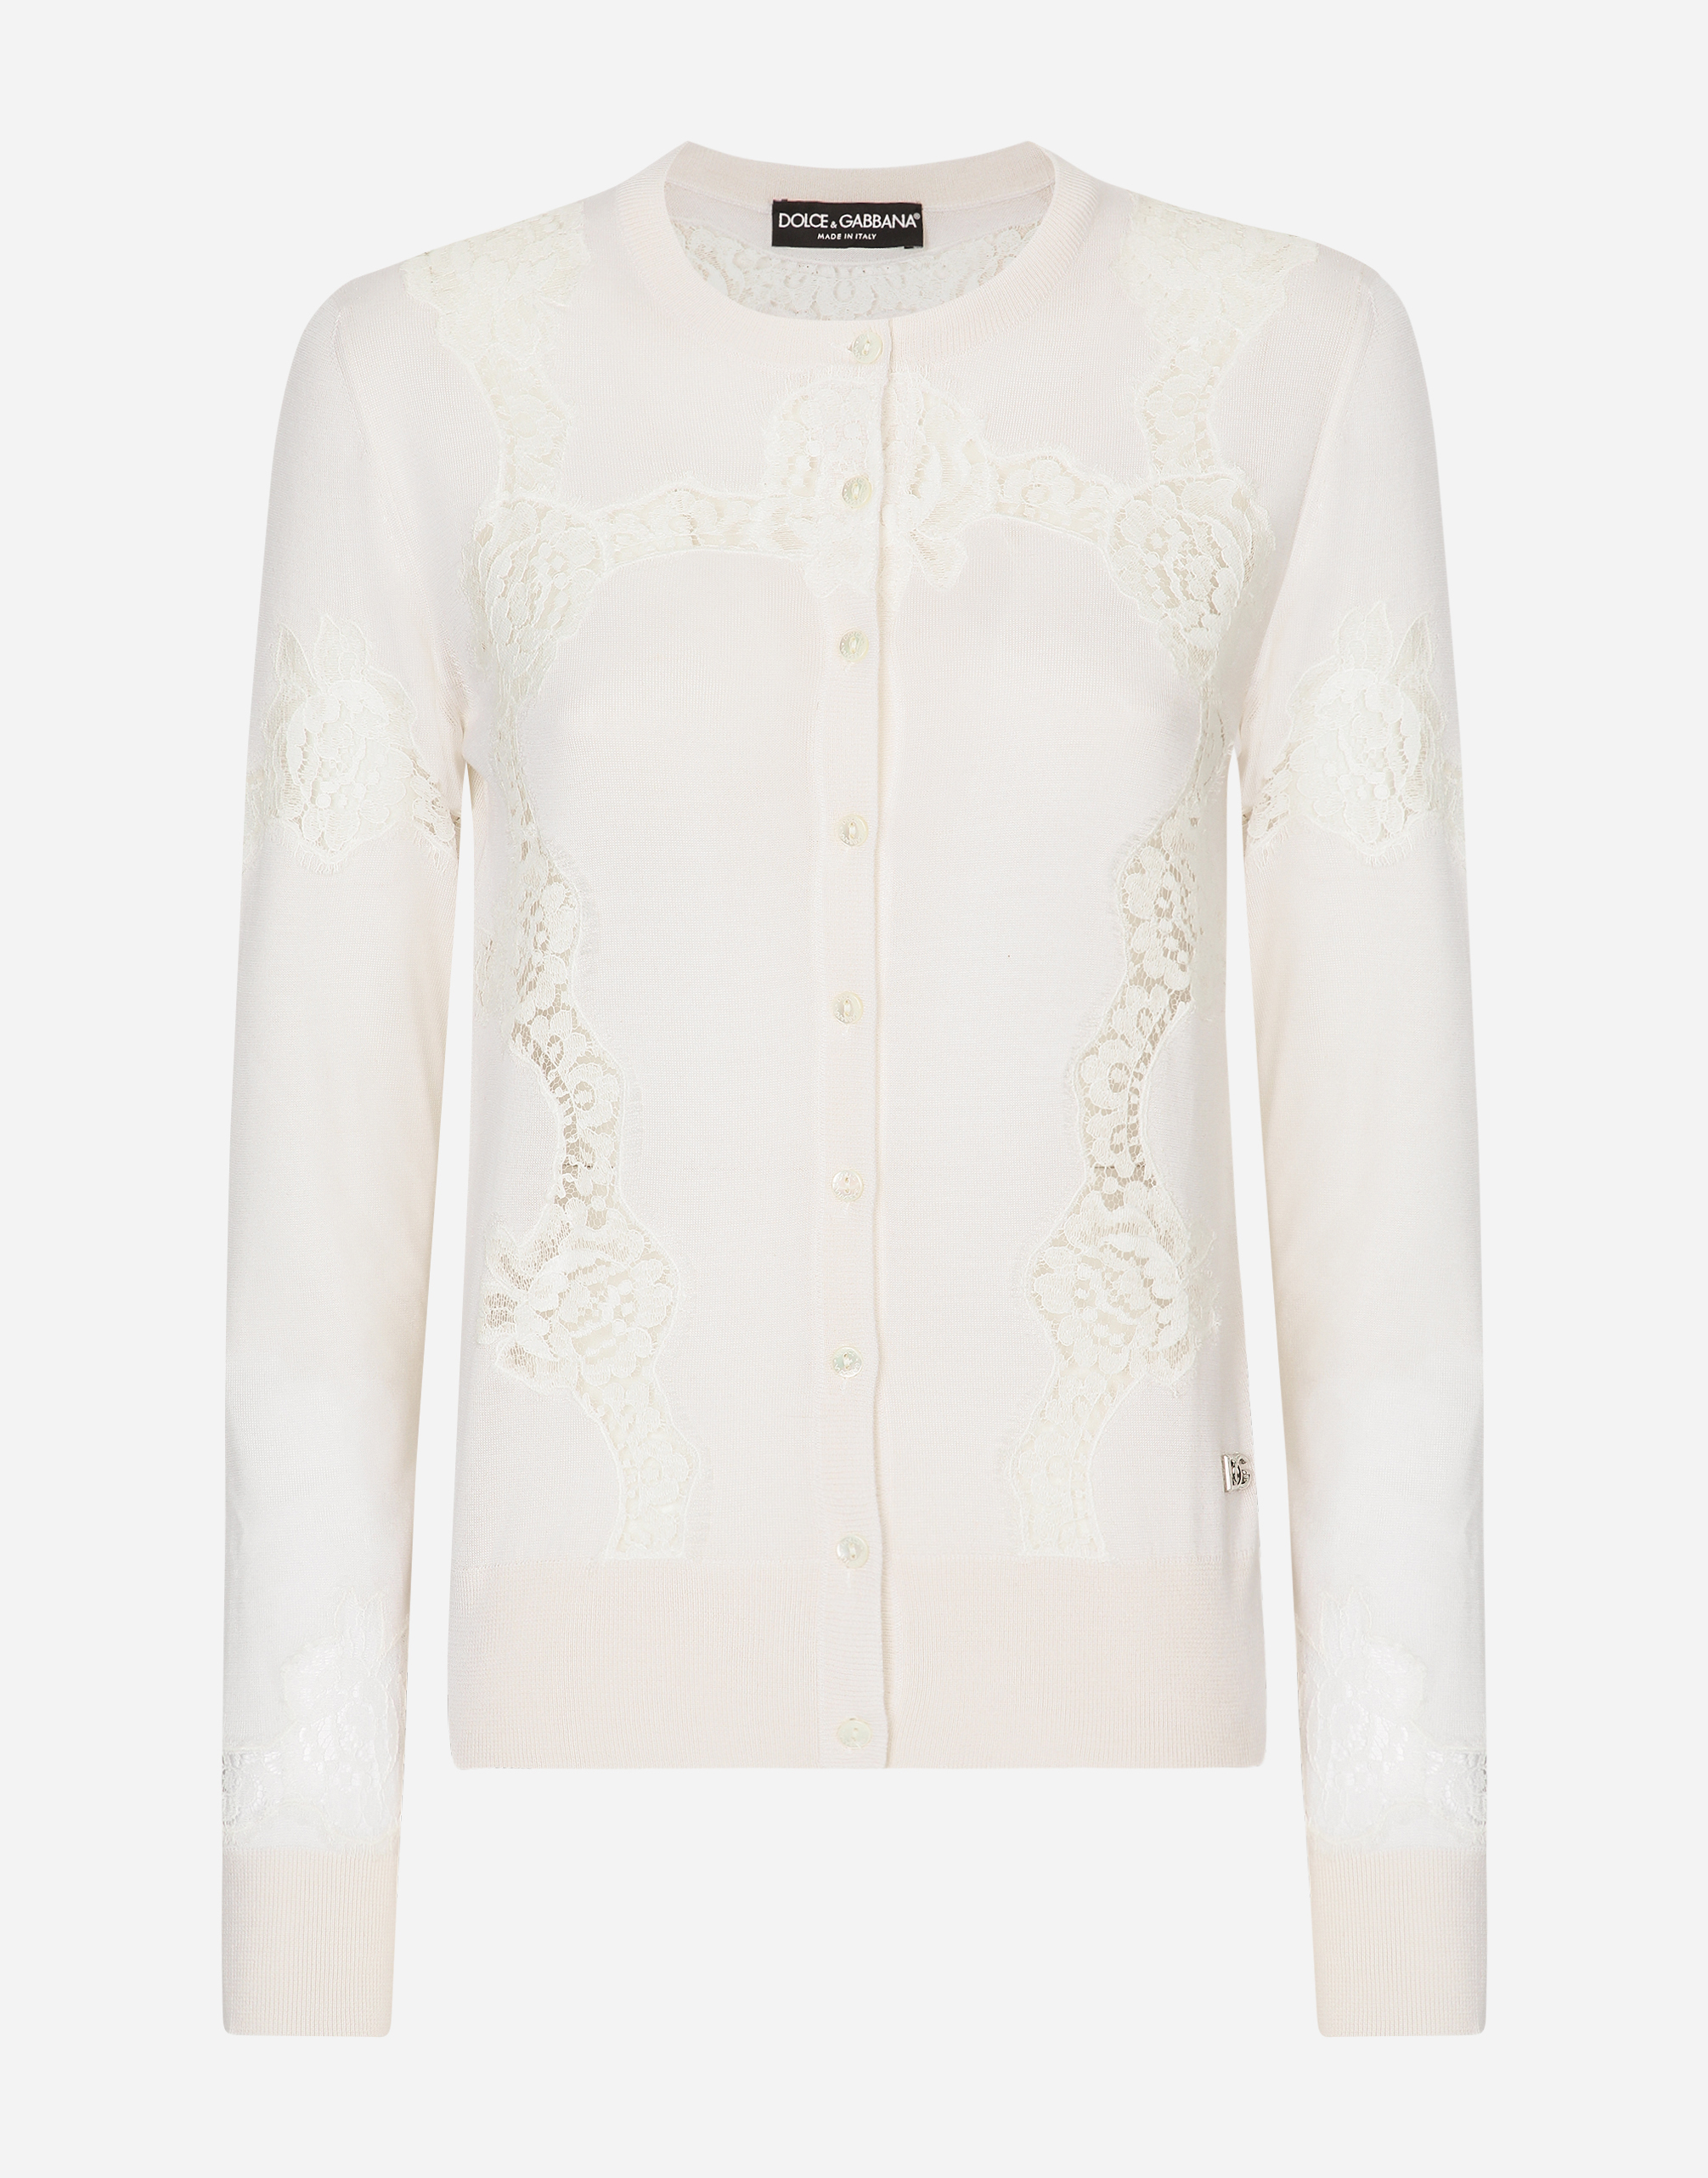 Dolce & Gabbana Cashmere And Silk Cardigan With Lace Inlay In White